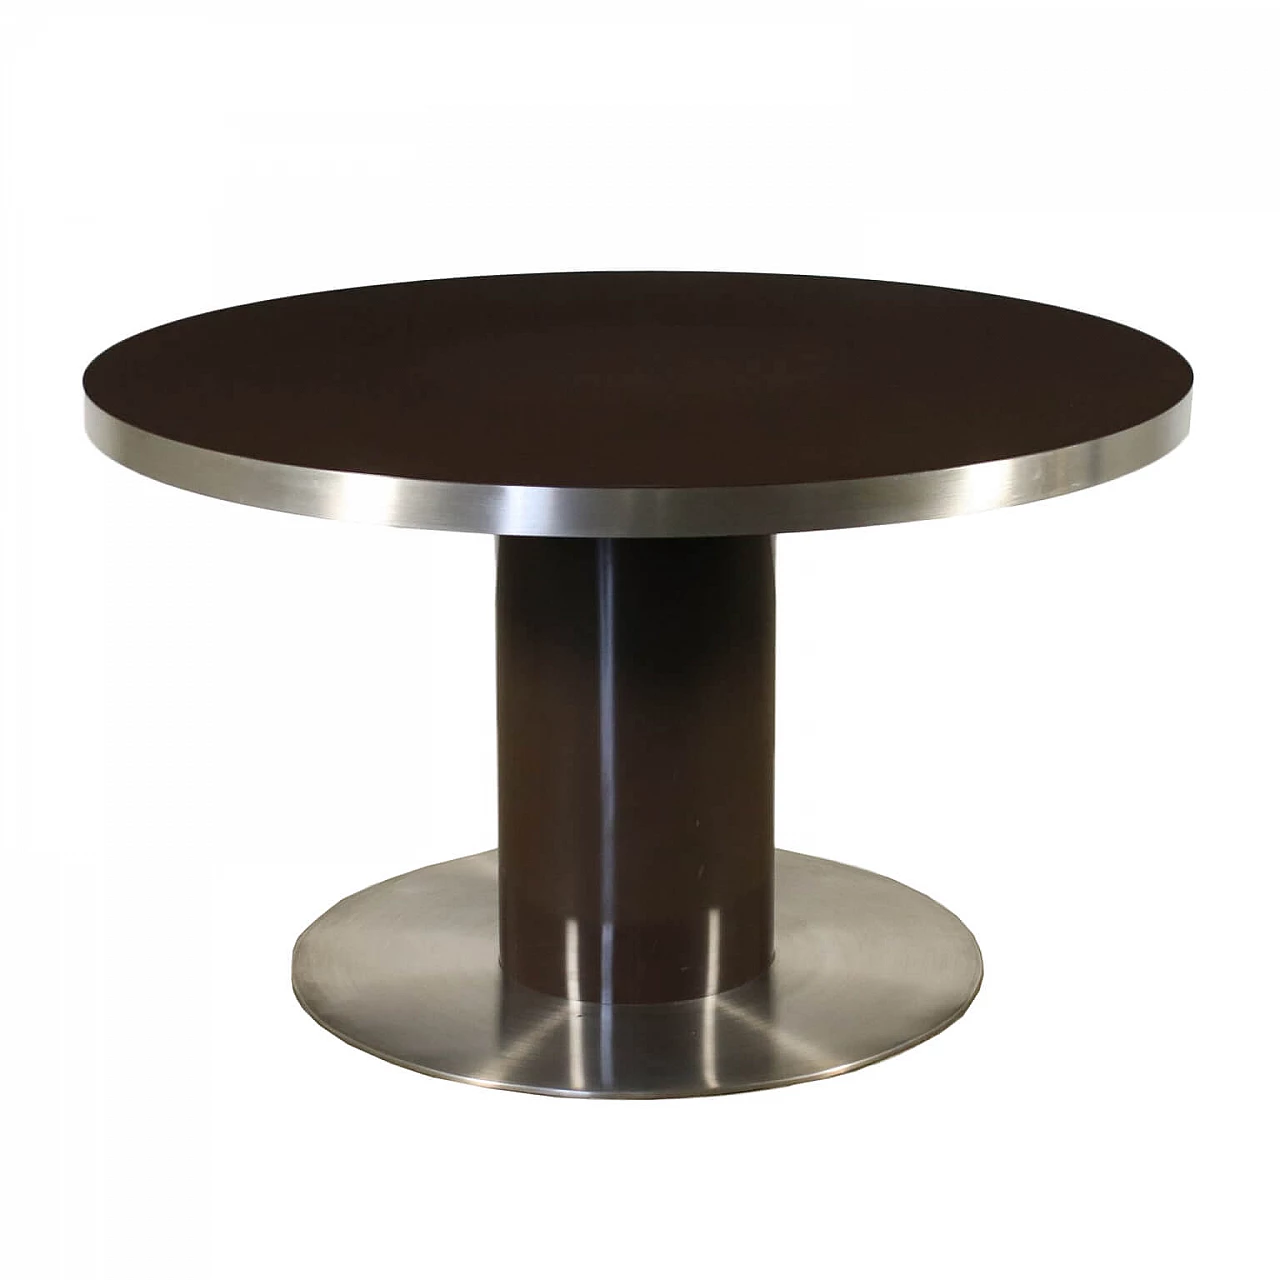 Willy Rizzo Table Lacquered Wood Chromed Metal Italy 1970s 1438096